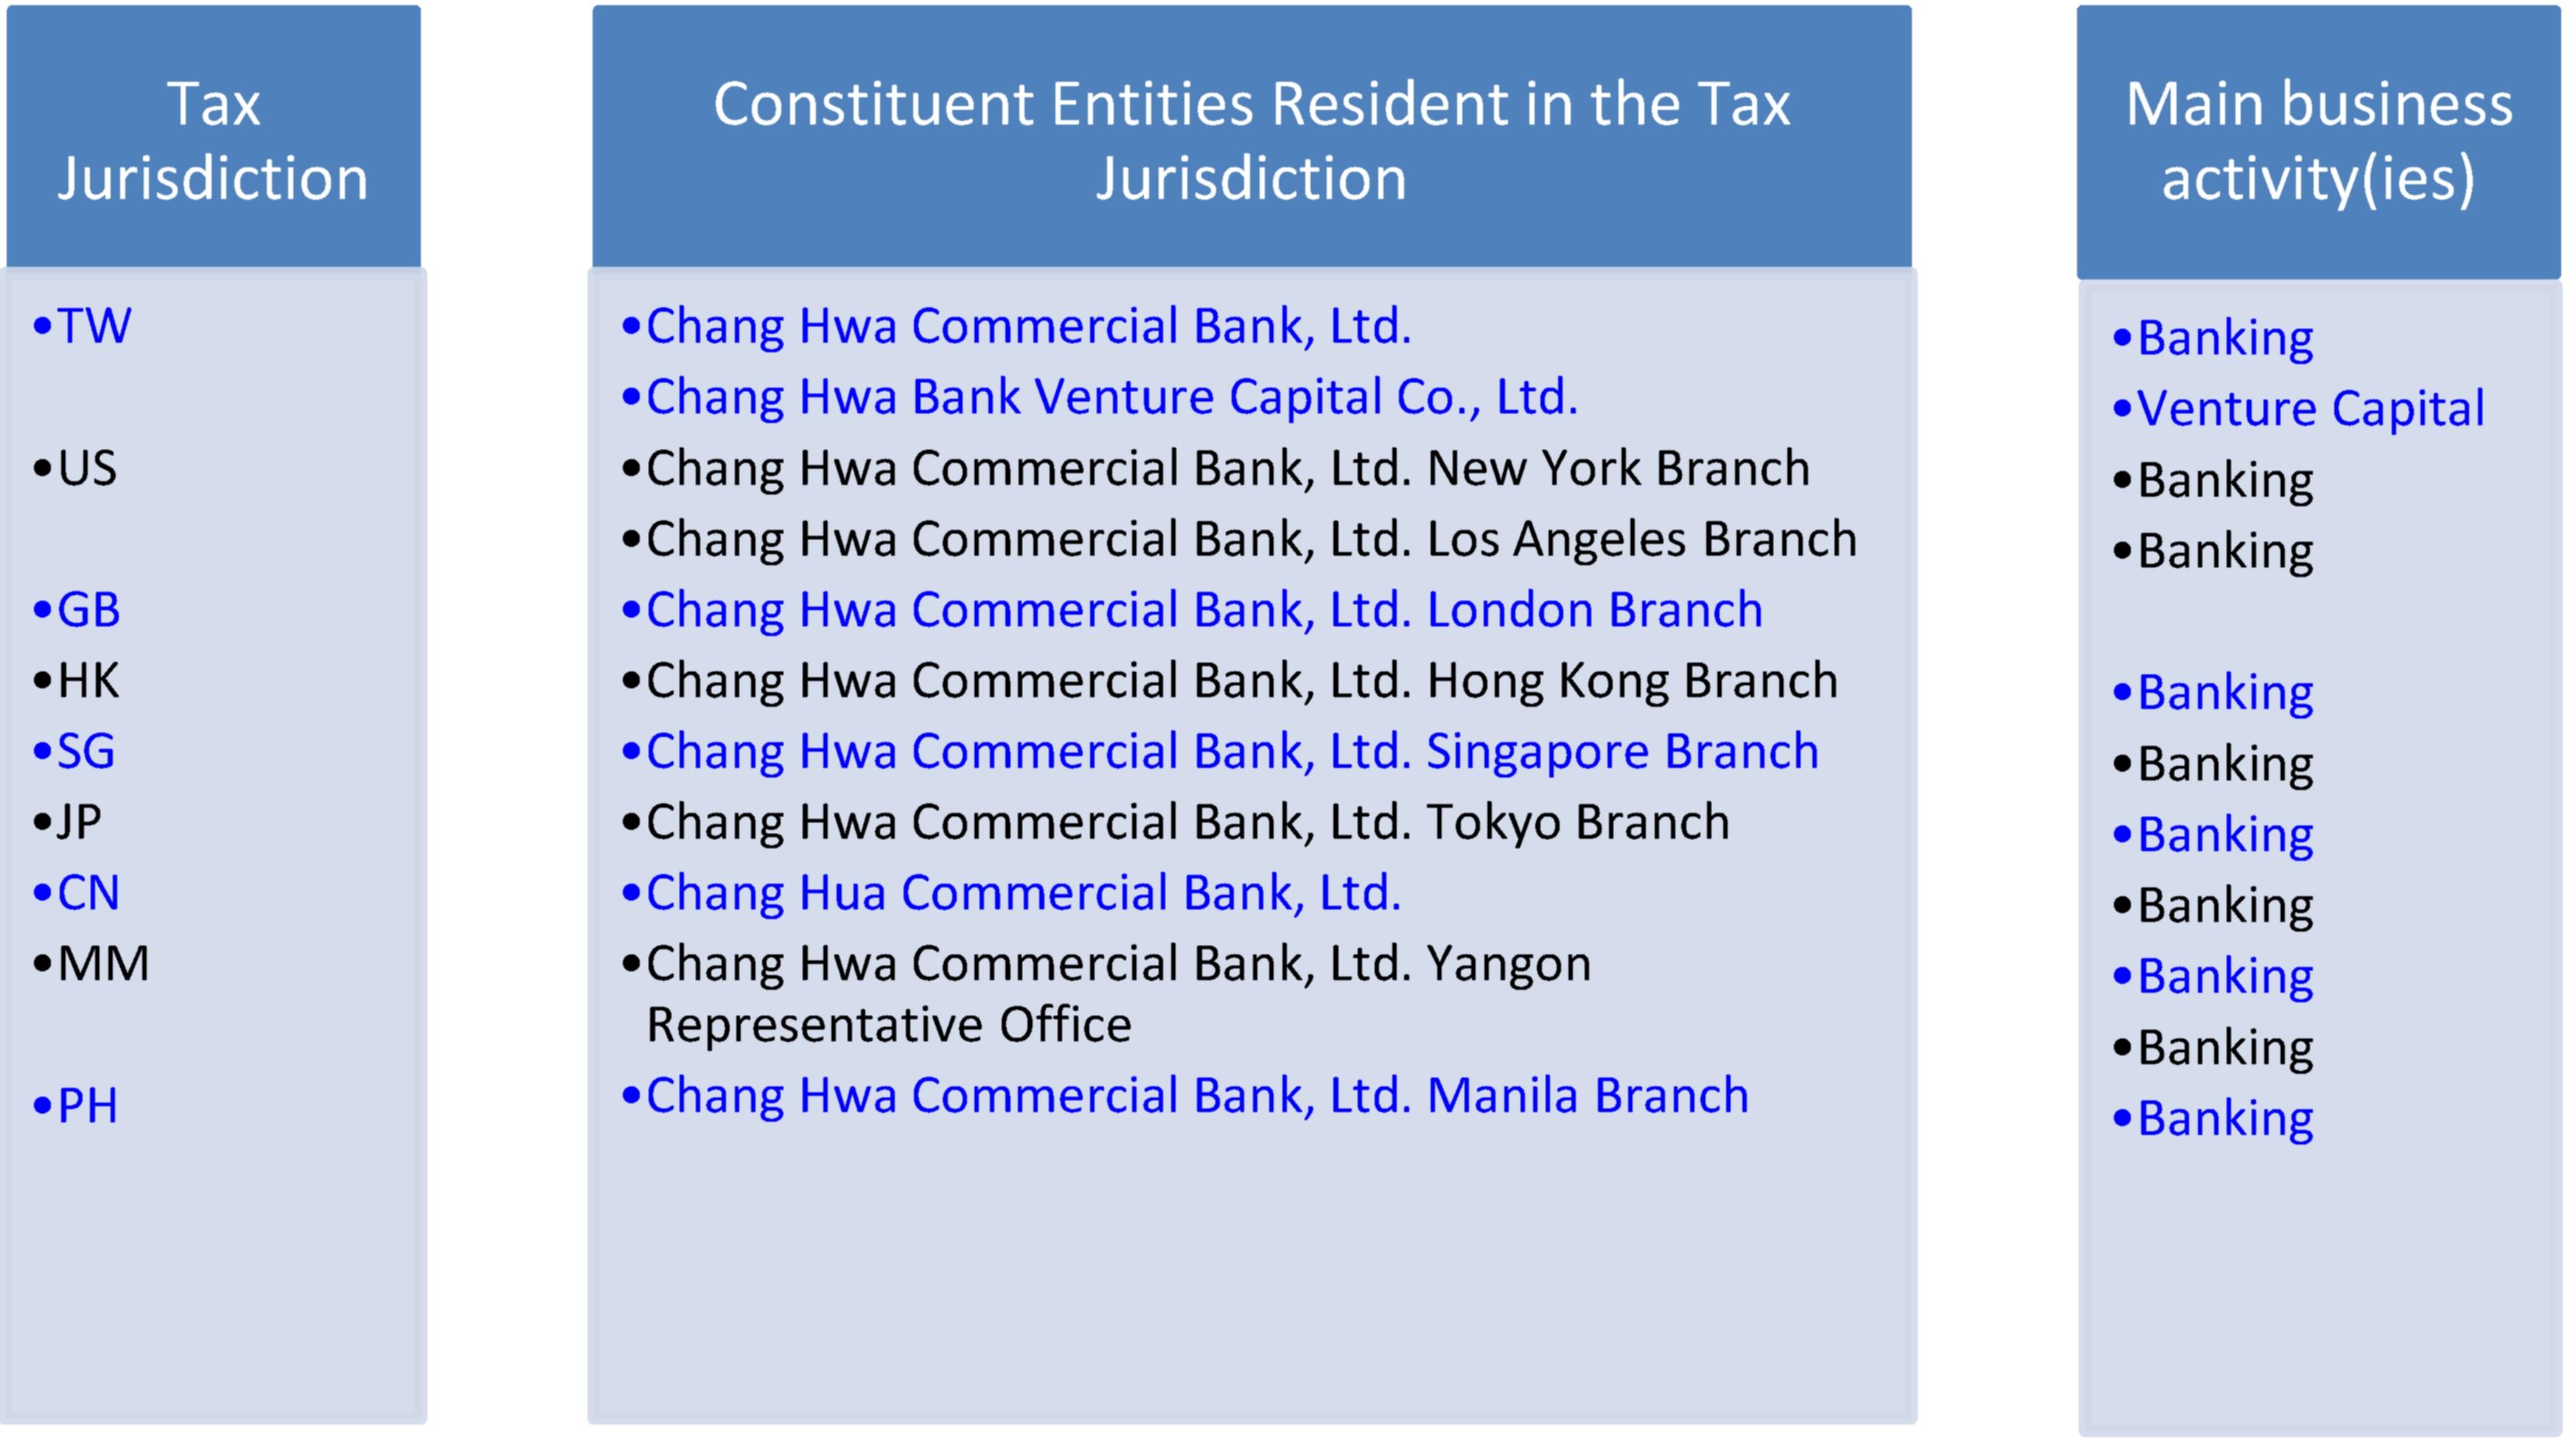 Constituent Entities Resident and Main business activity of Chang Hwa Commercial Bank, Ltd.